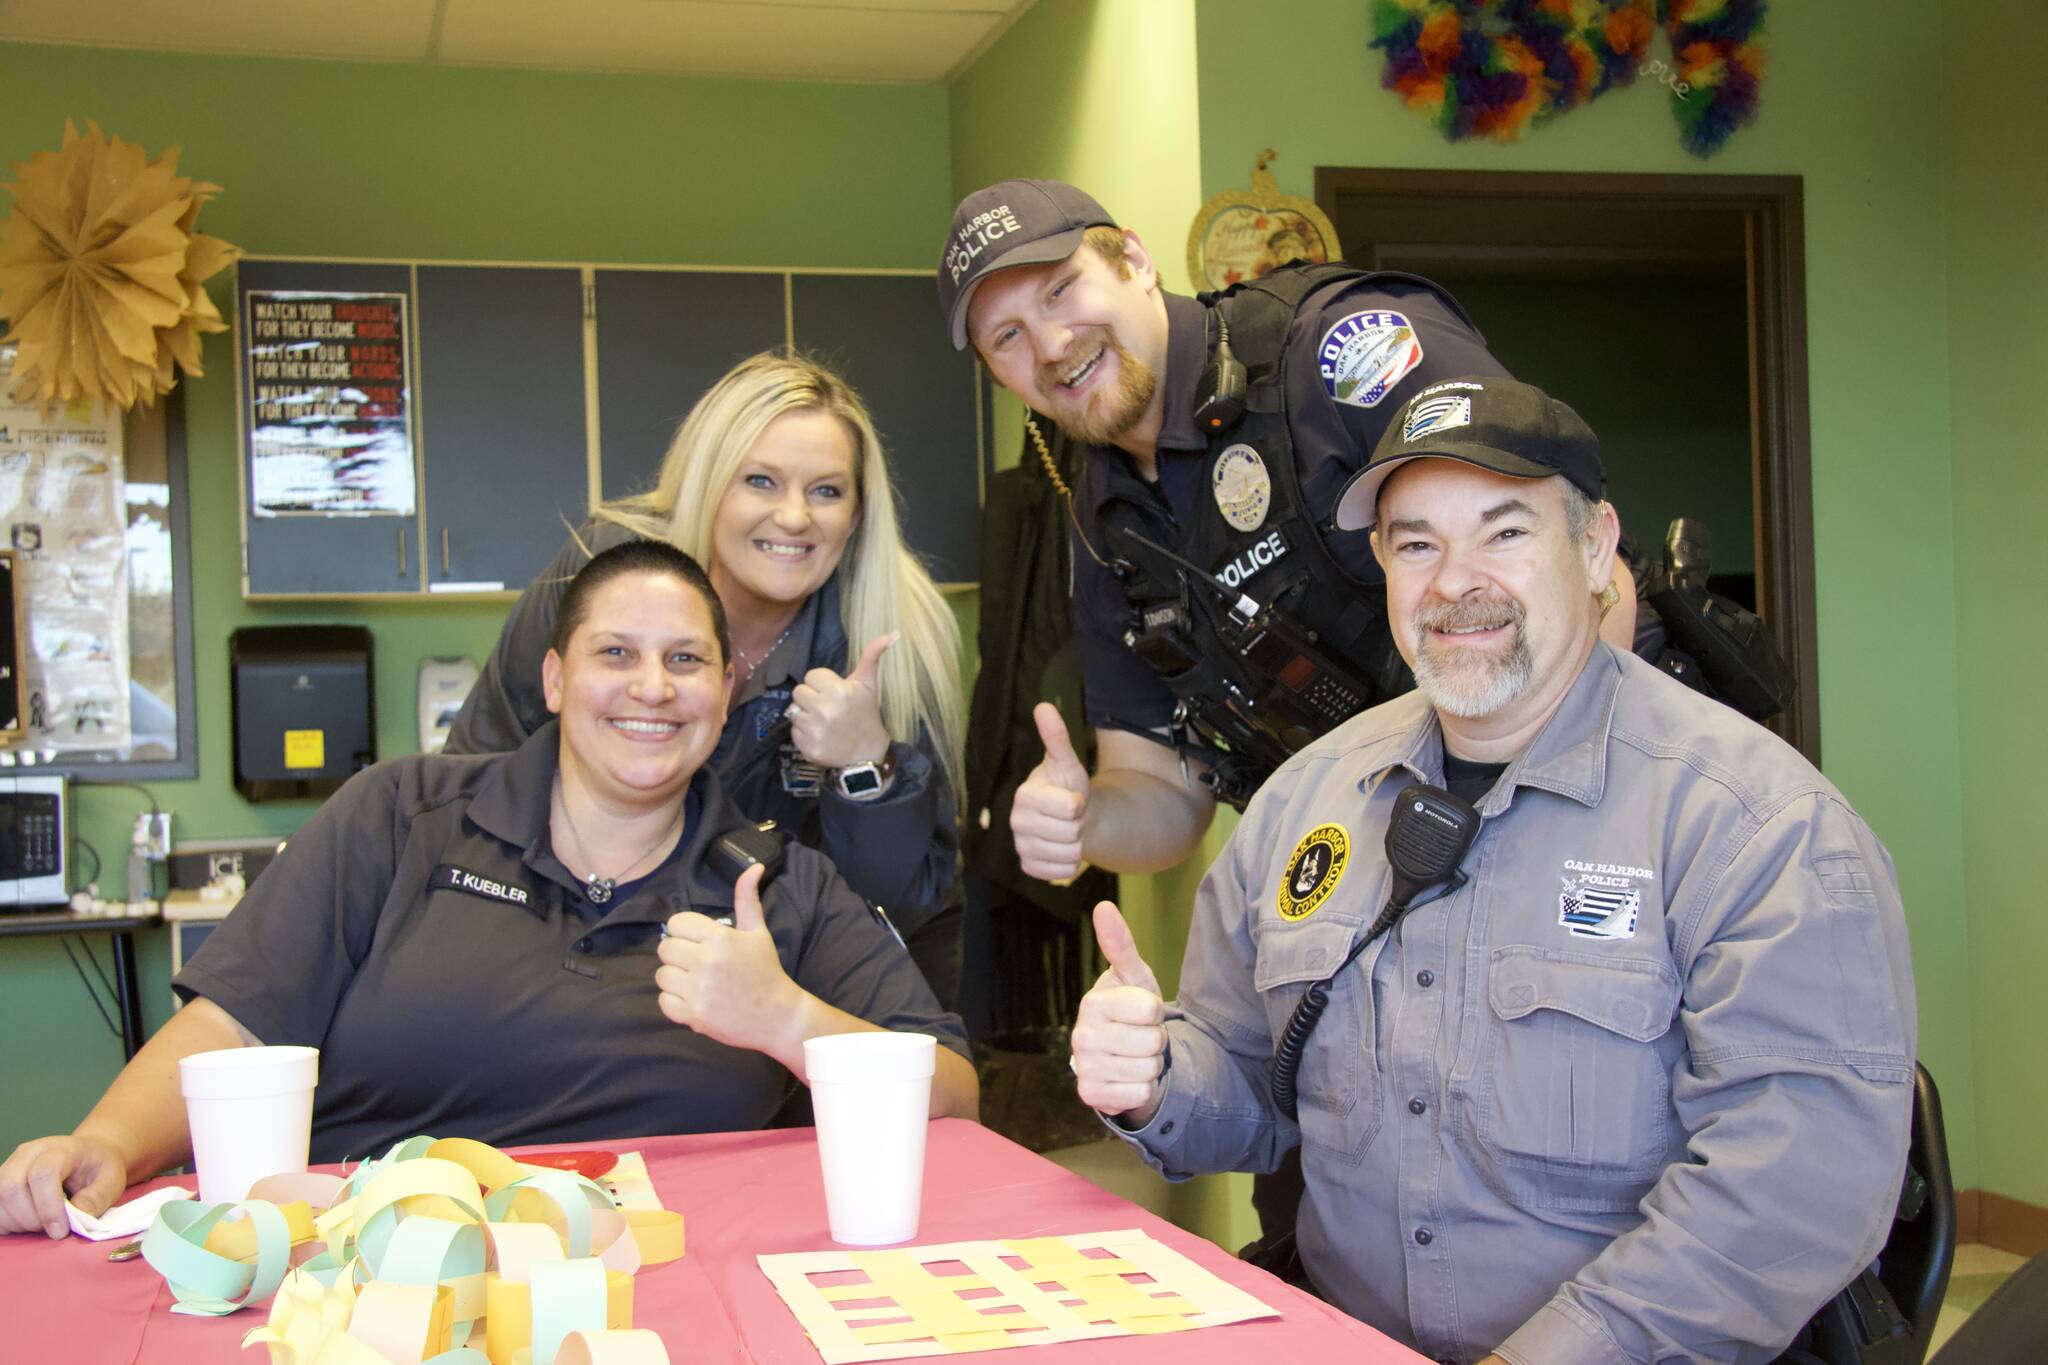 Photo by Rachel Rosen/Whidbey News-Times
From left, Teresa Kuebler, Lacey Lutz, Tyler Adamson and Greg Woodward are some of the first responders who attended Friendsgiving hosted by Exceptional Academy students this year.